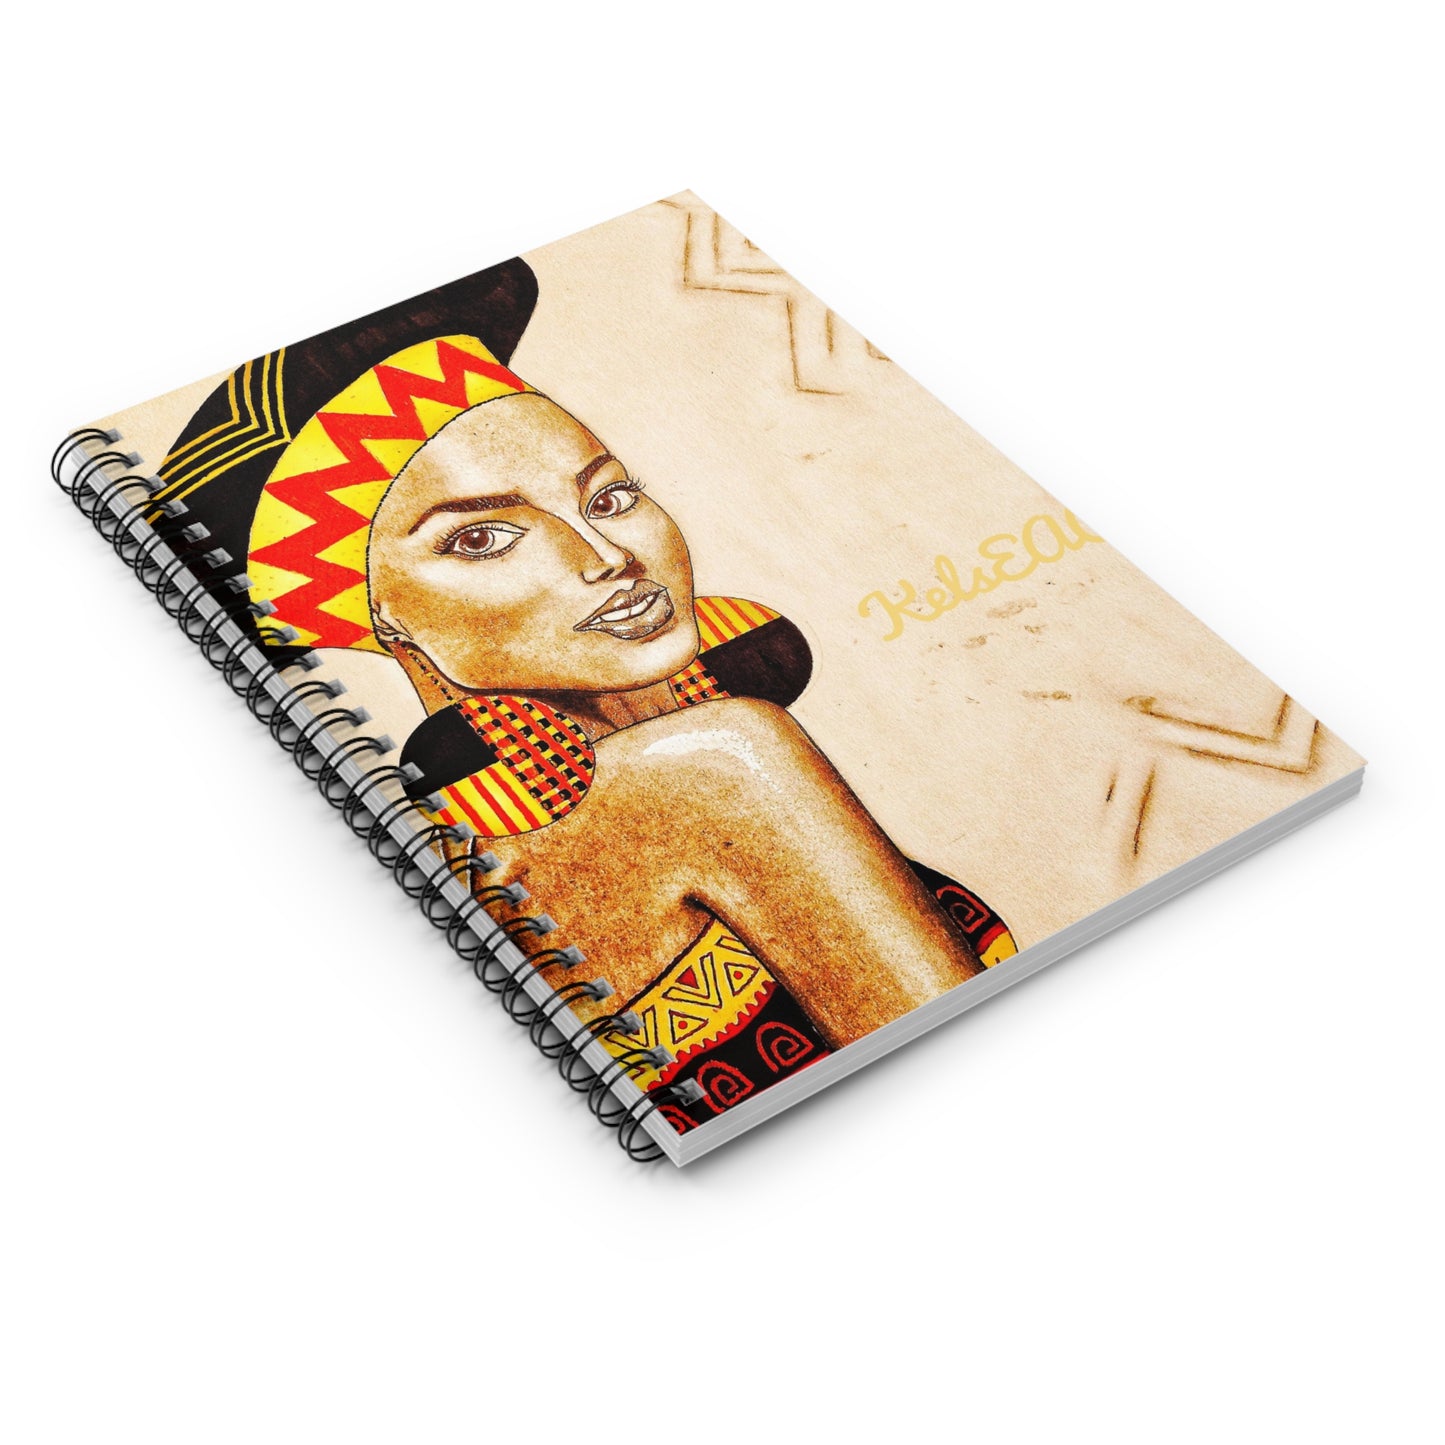 Stylish Portica Yellow Spiral Notebook - Ruled Line